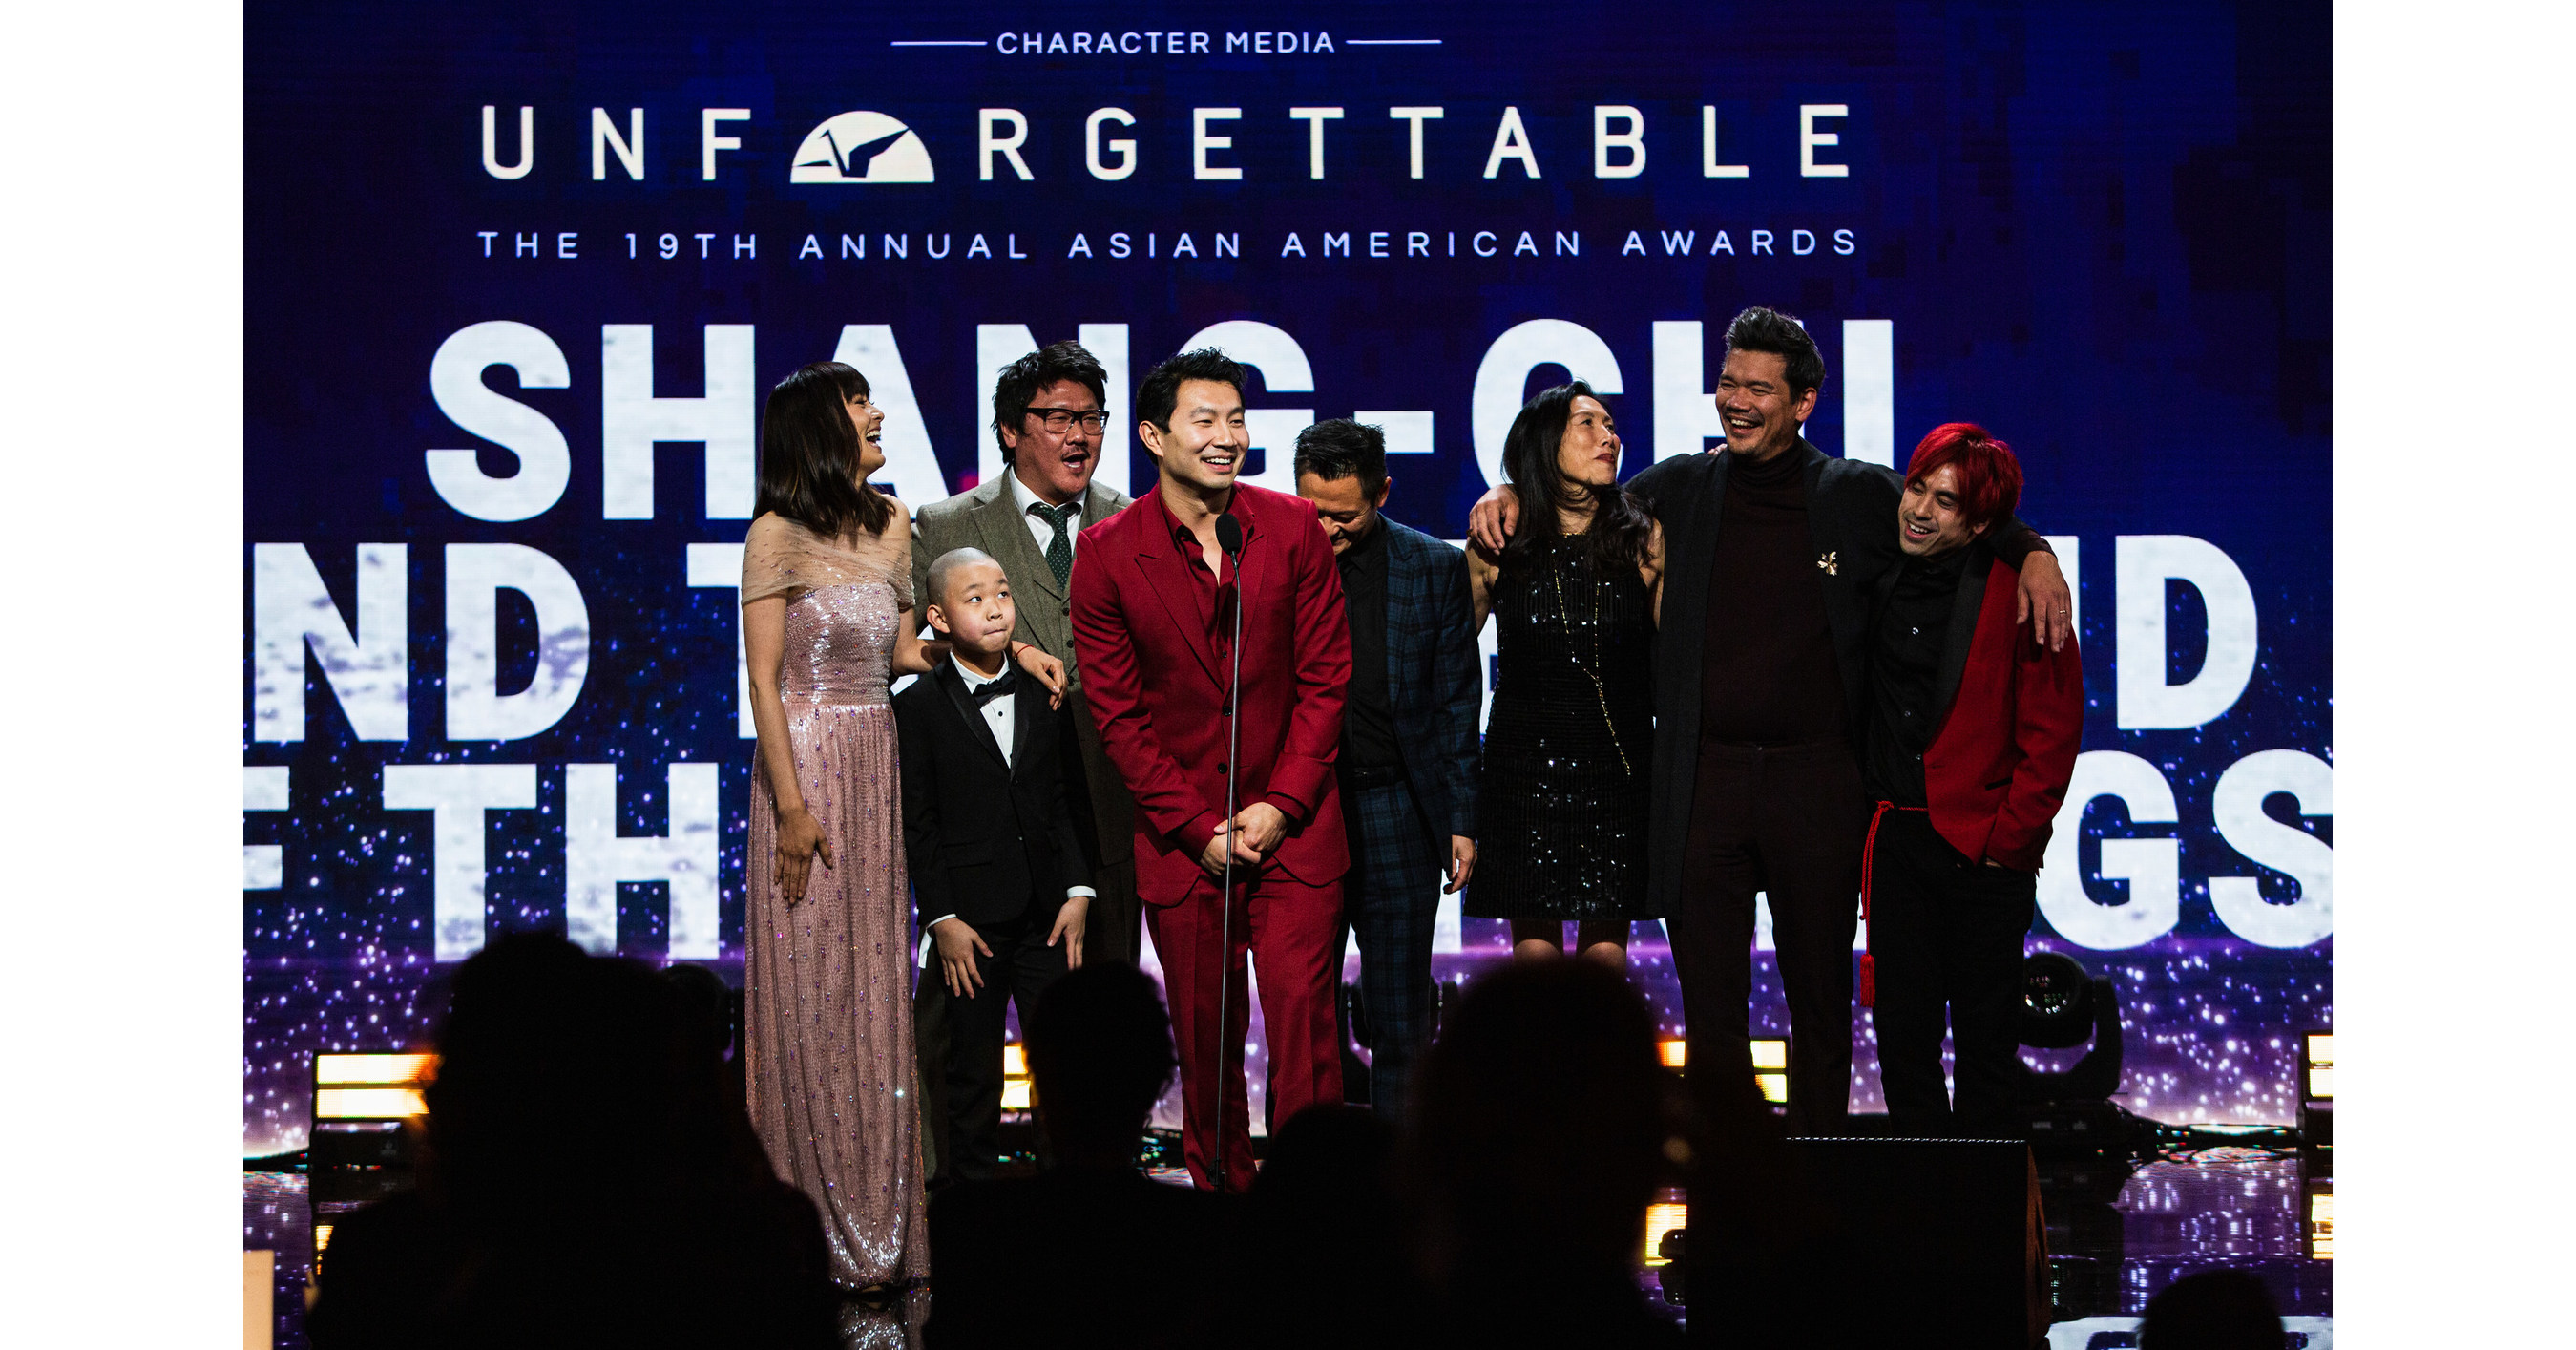 Fresh Off the Boat' Cast to Be Honored at Unforgettable Gala